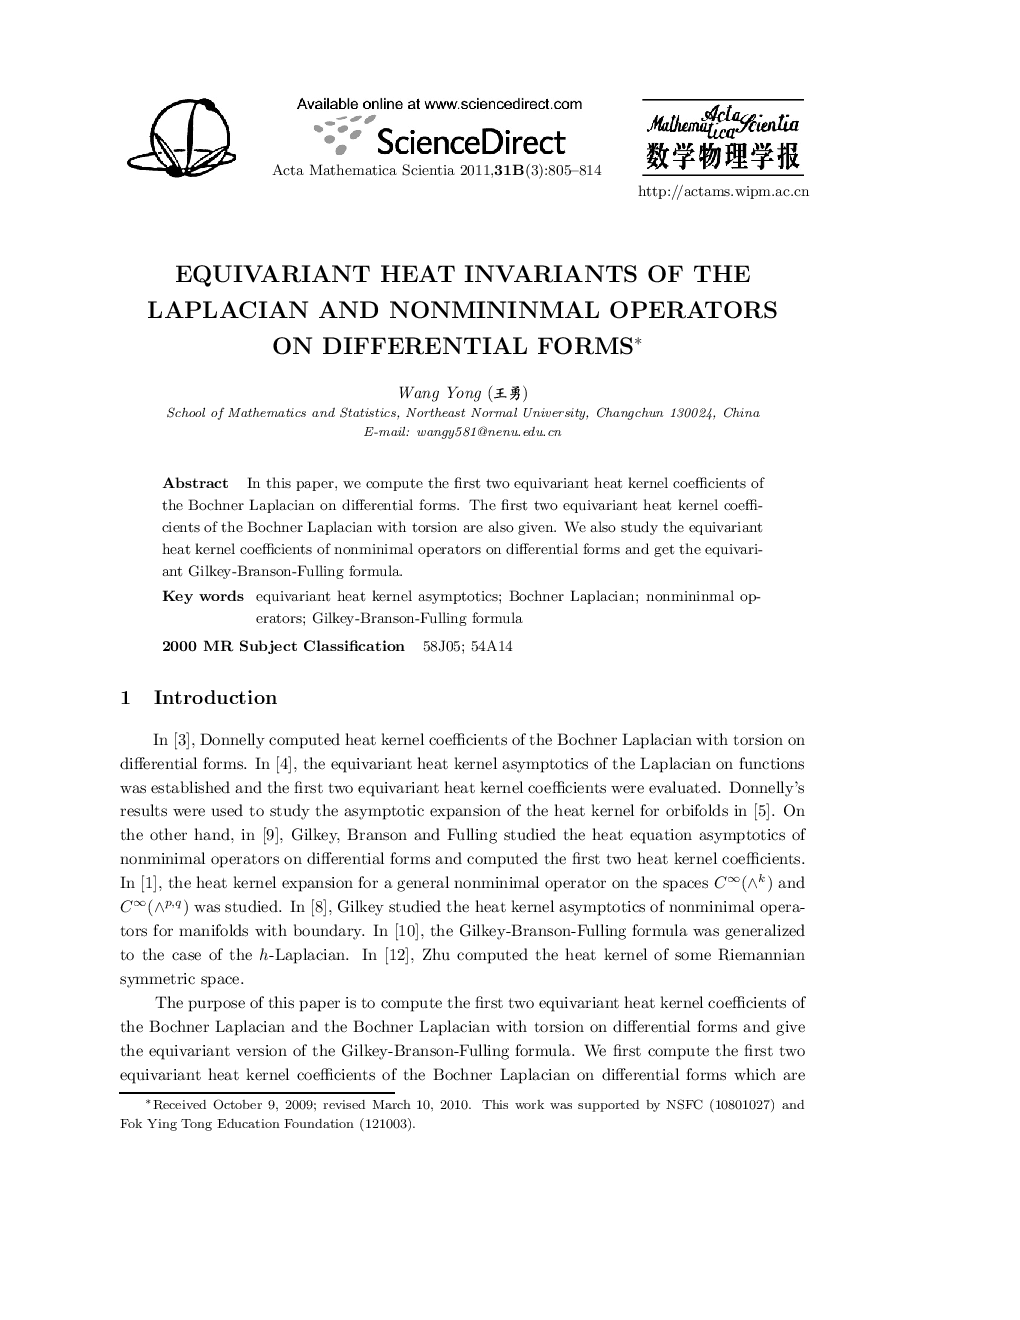 Equivariant heat invariants of the laplacian and nonmininmal operators on differential forms 